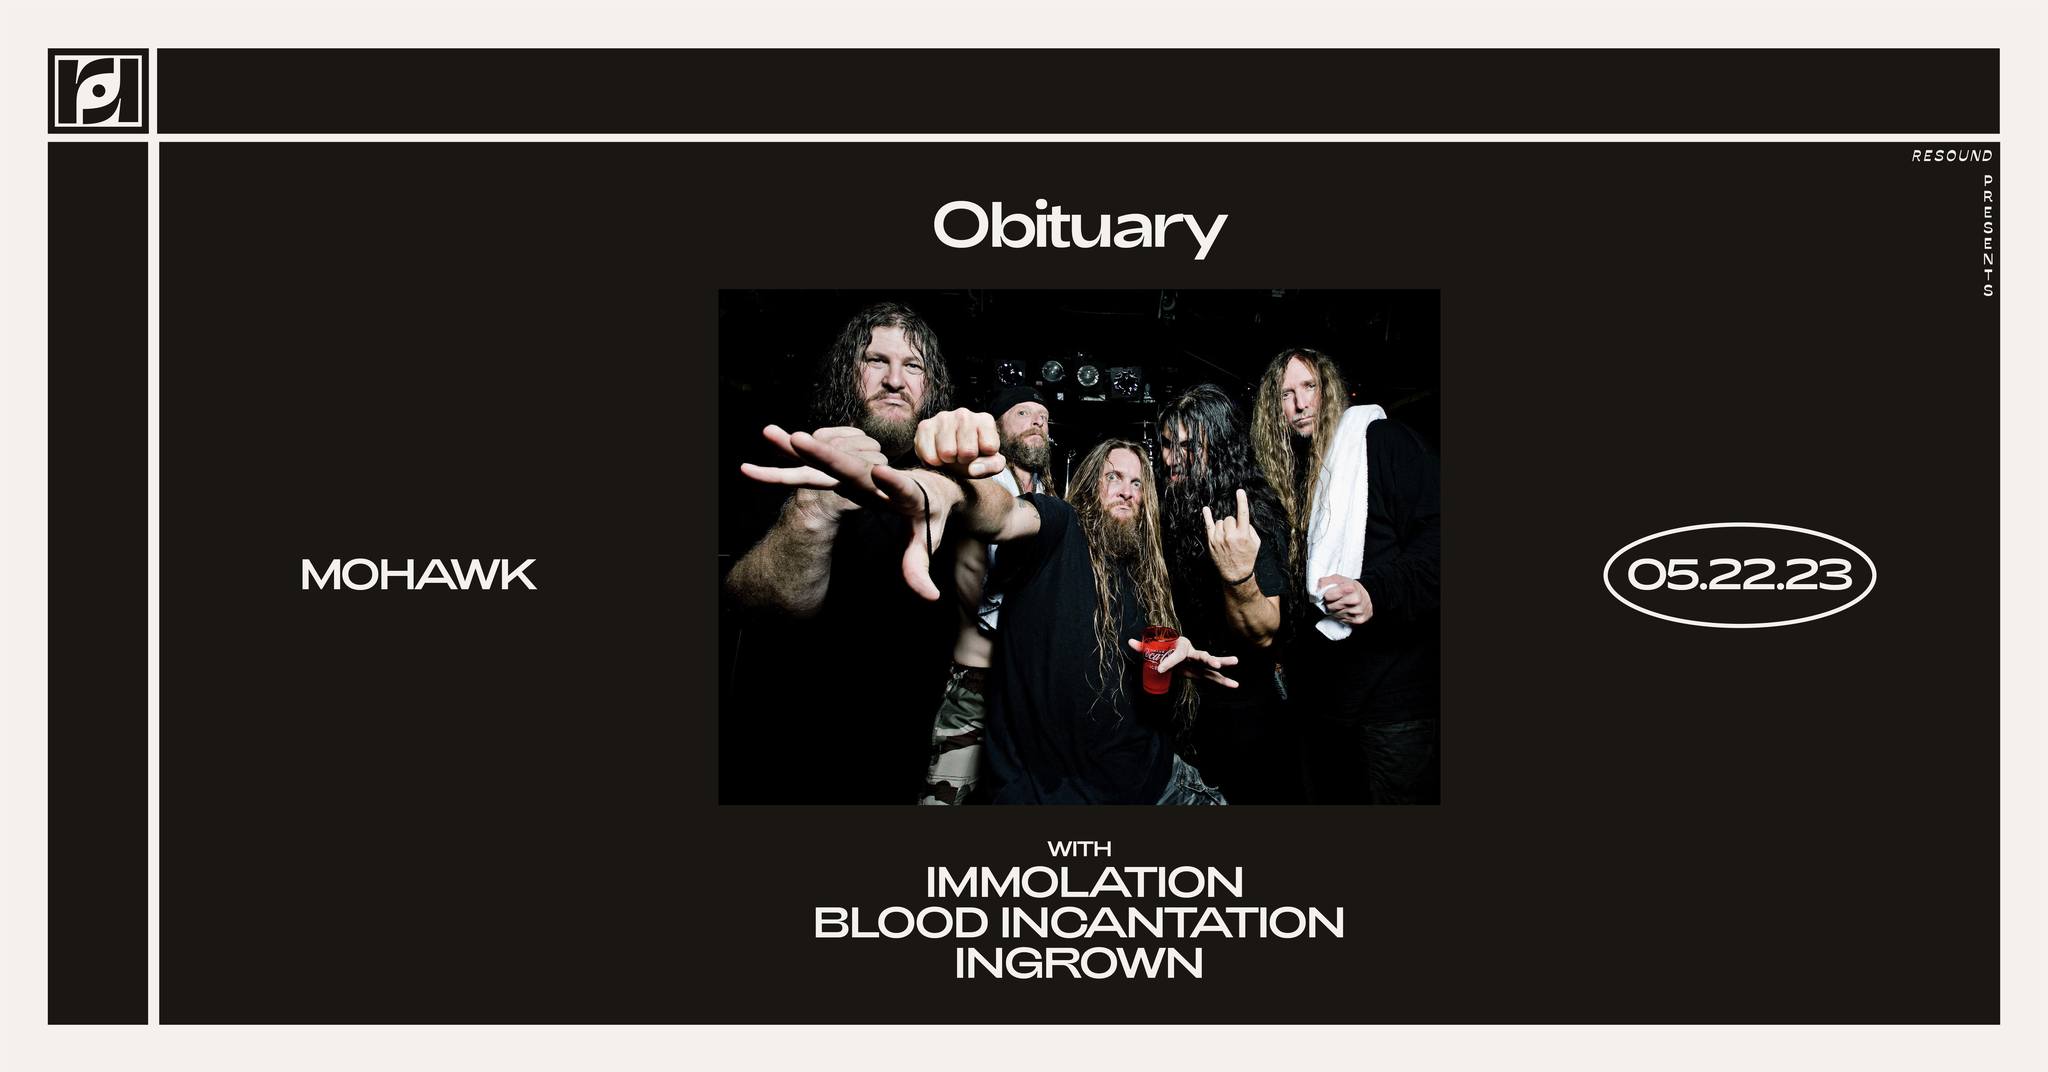 Resound Presents: Obituary w/ Immolation, Blood Incantation and Ingrown